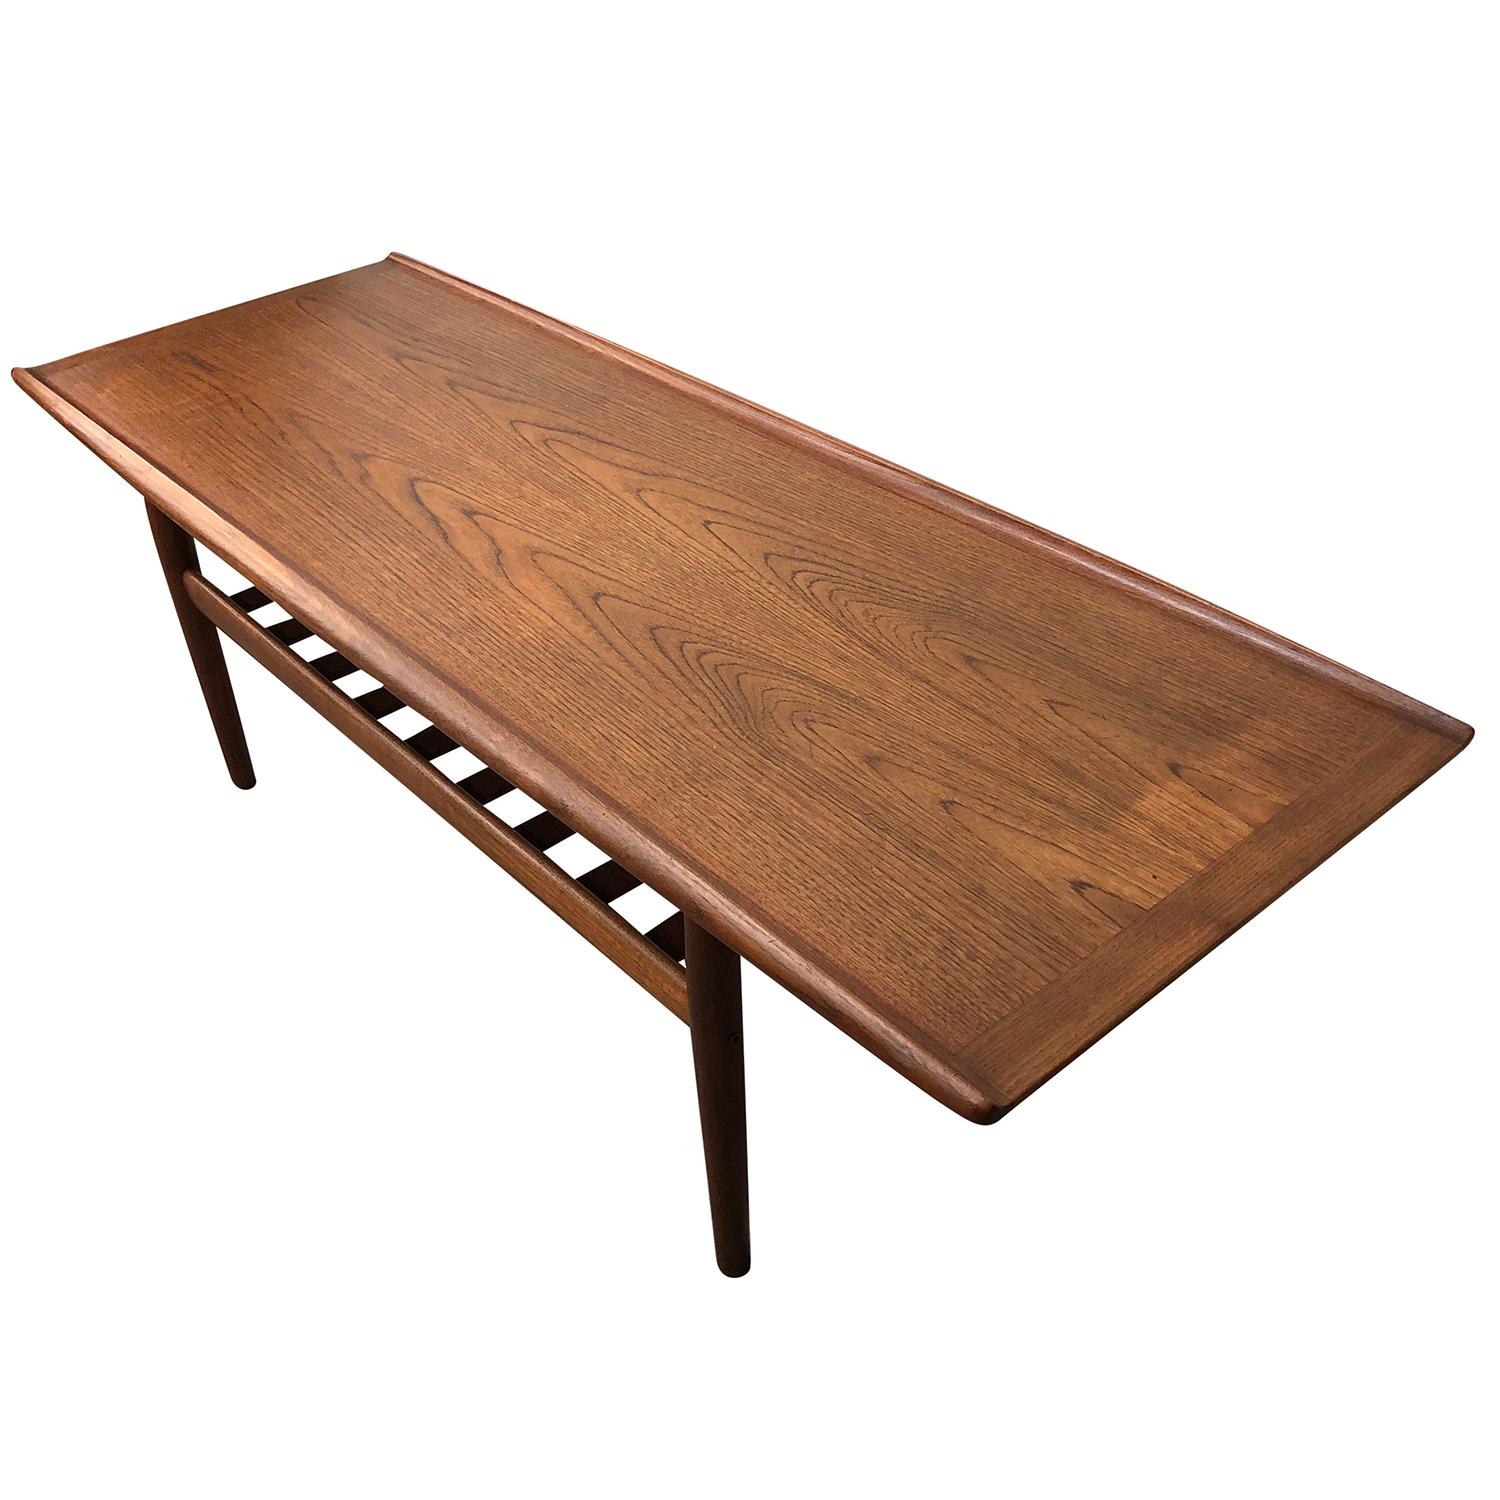 Hand-Carved 20th Century Danish Vintage Teak Coffee Table by Hans J. Wegner & Andreas Tuck For Sale